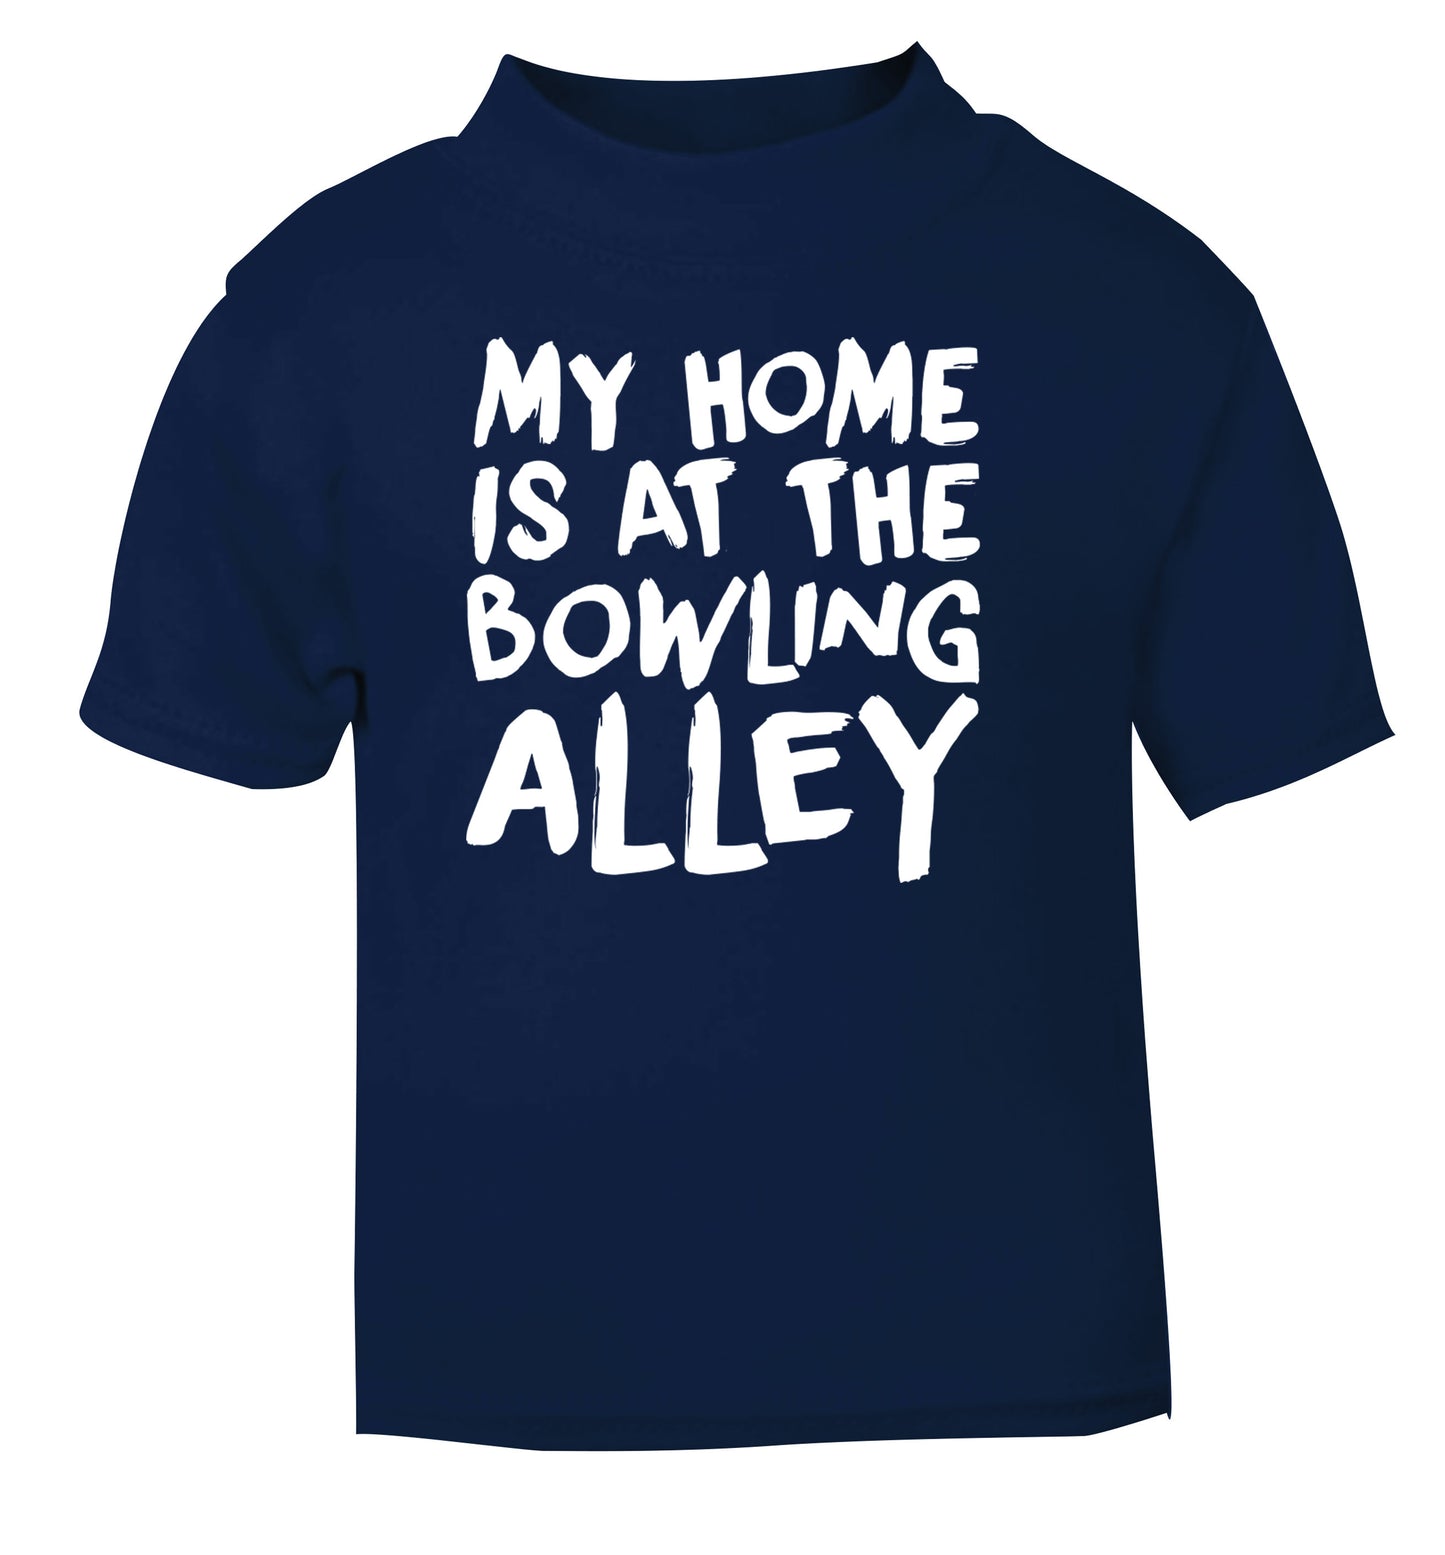 My home is at the bowling alley navy Baby Toddler Tshirt 2 Years